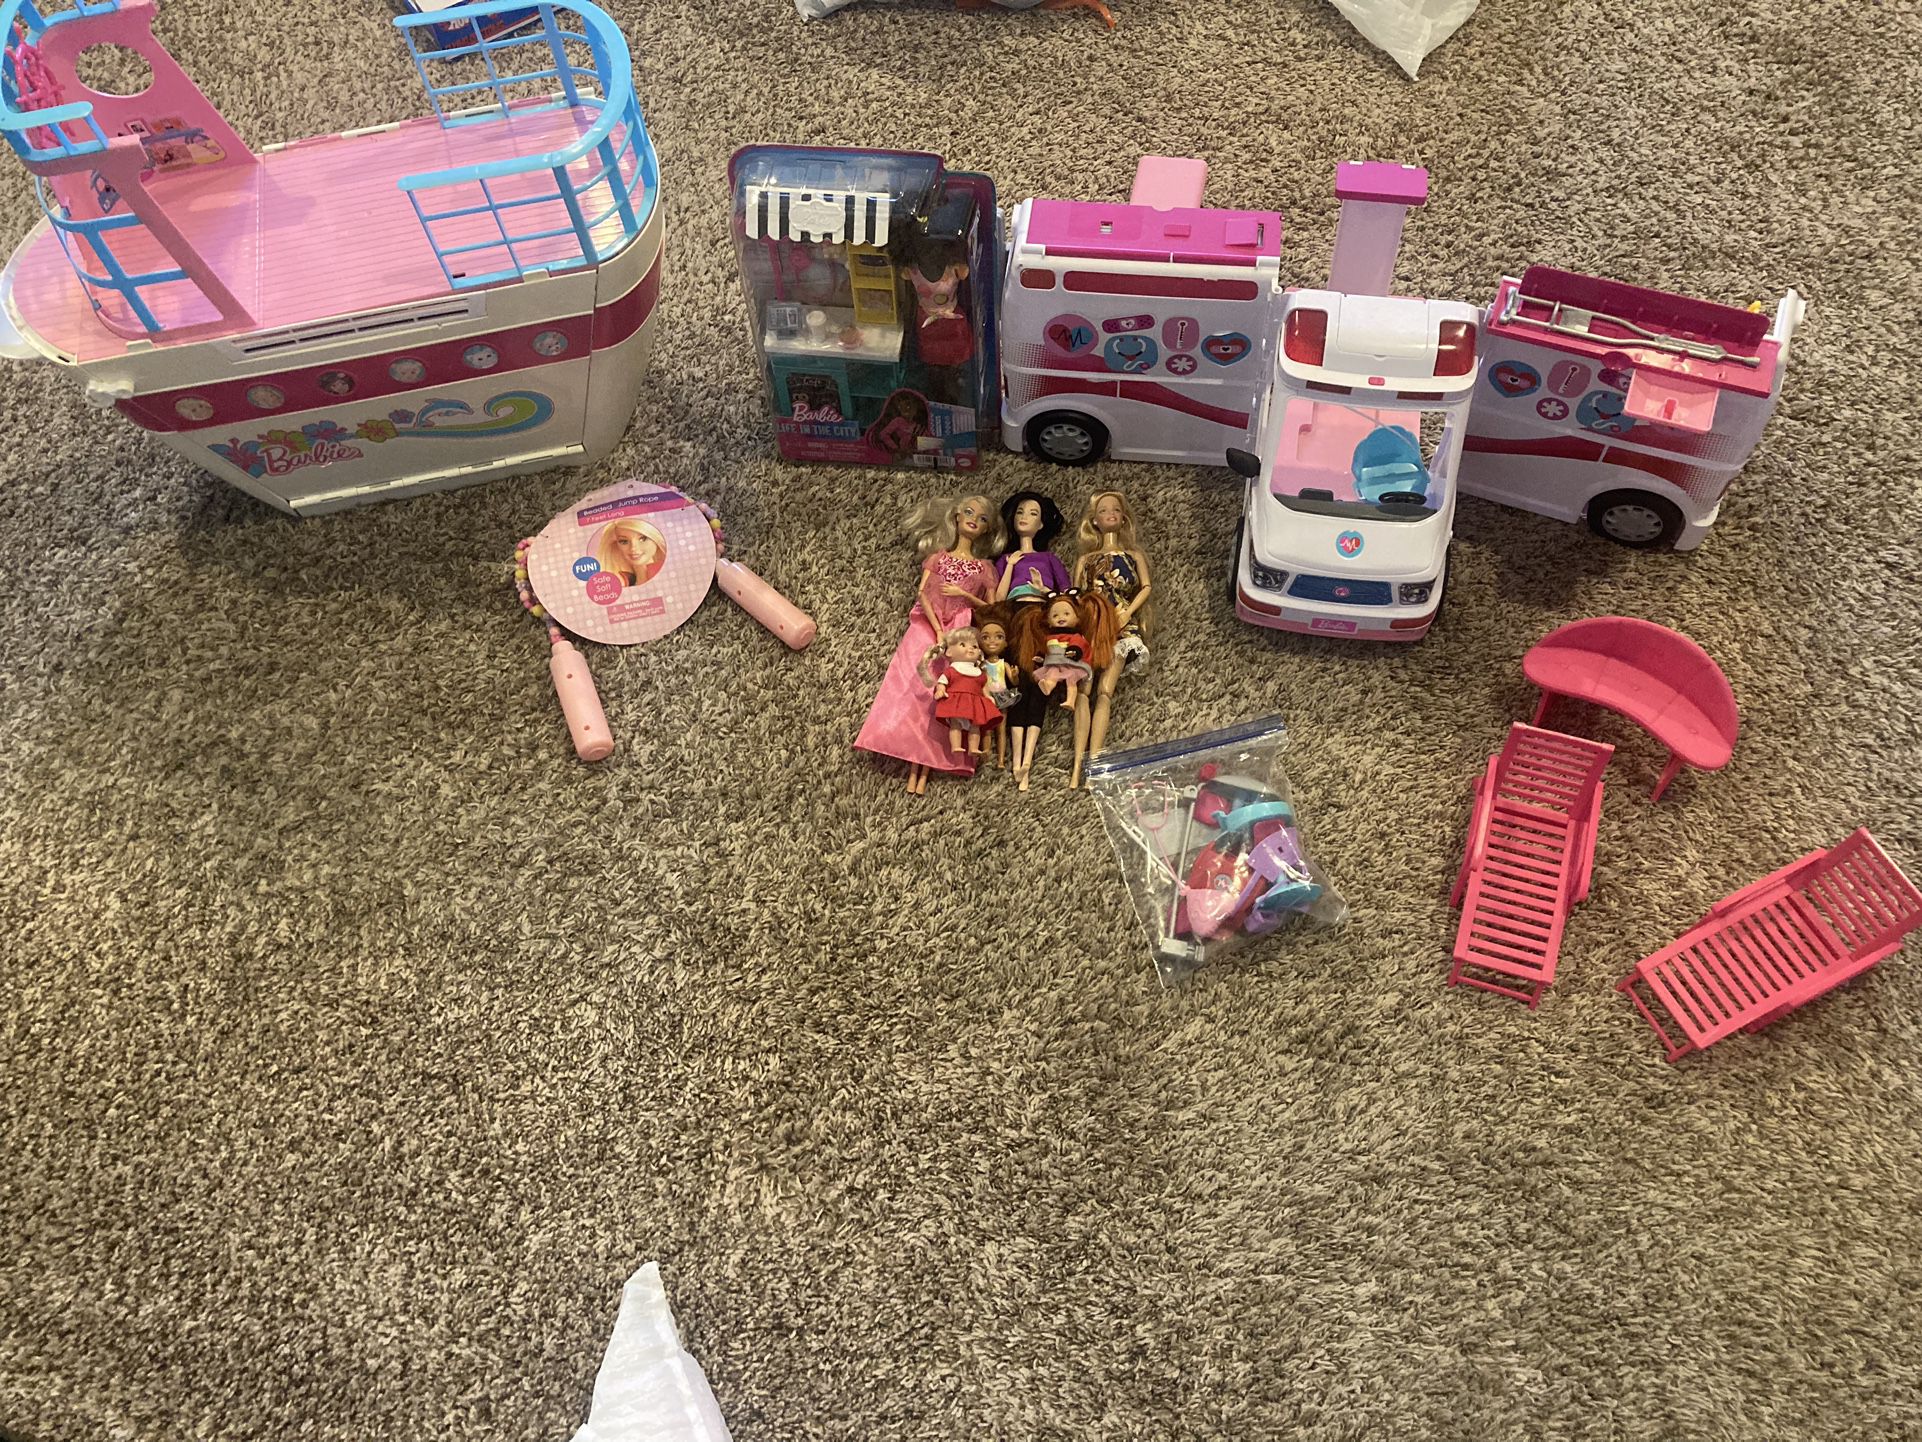  Barbie Bundle Come With Few More Things Not Seen In Pictures 